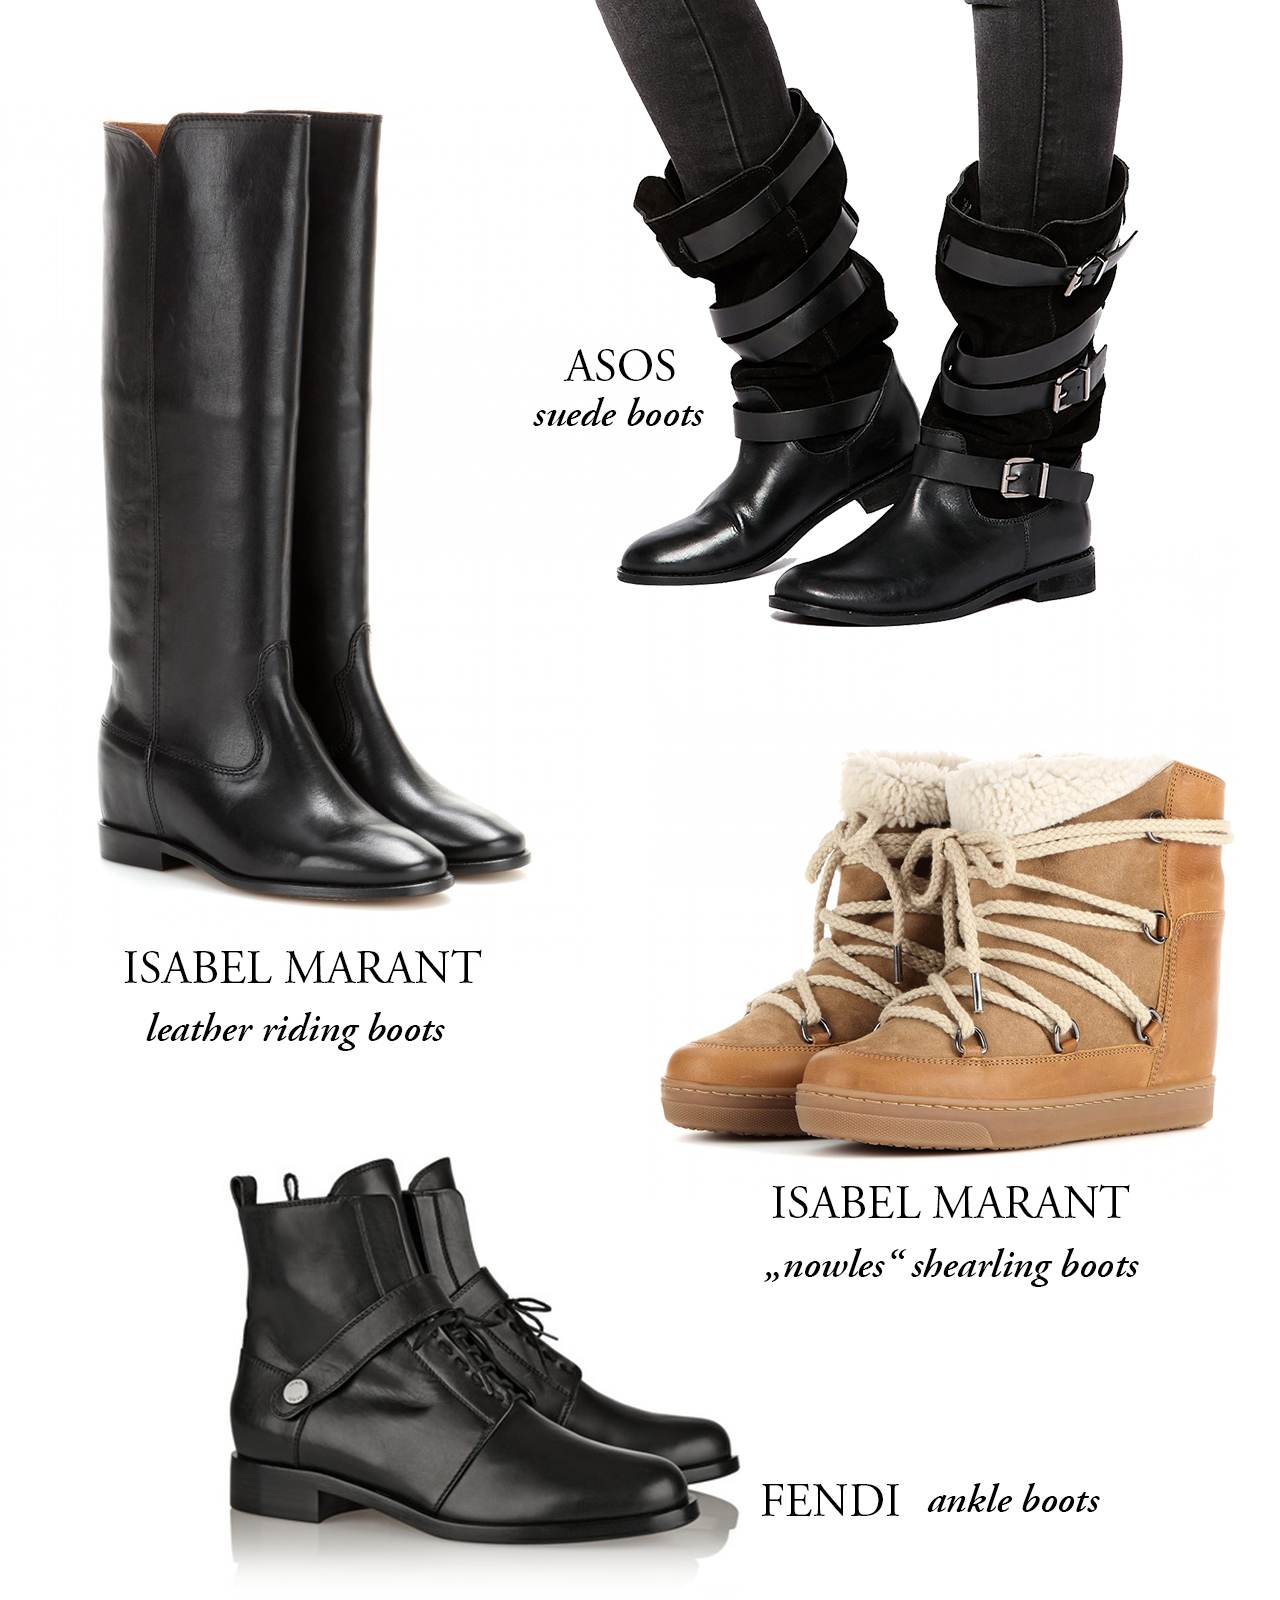 CRAVINGS: searching for the perfect winter boots